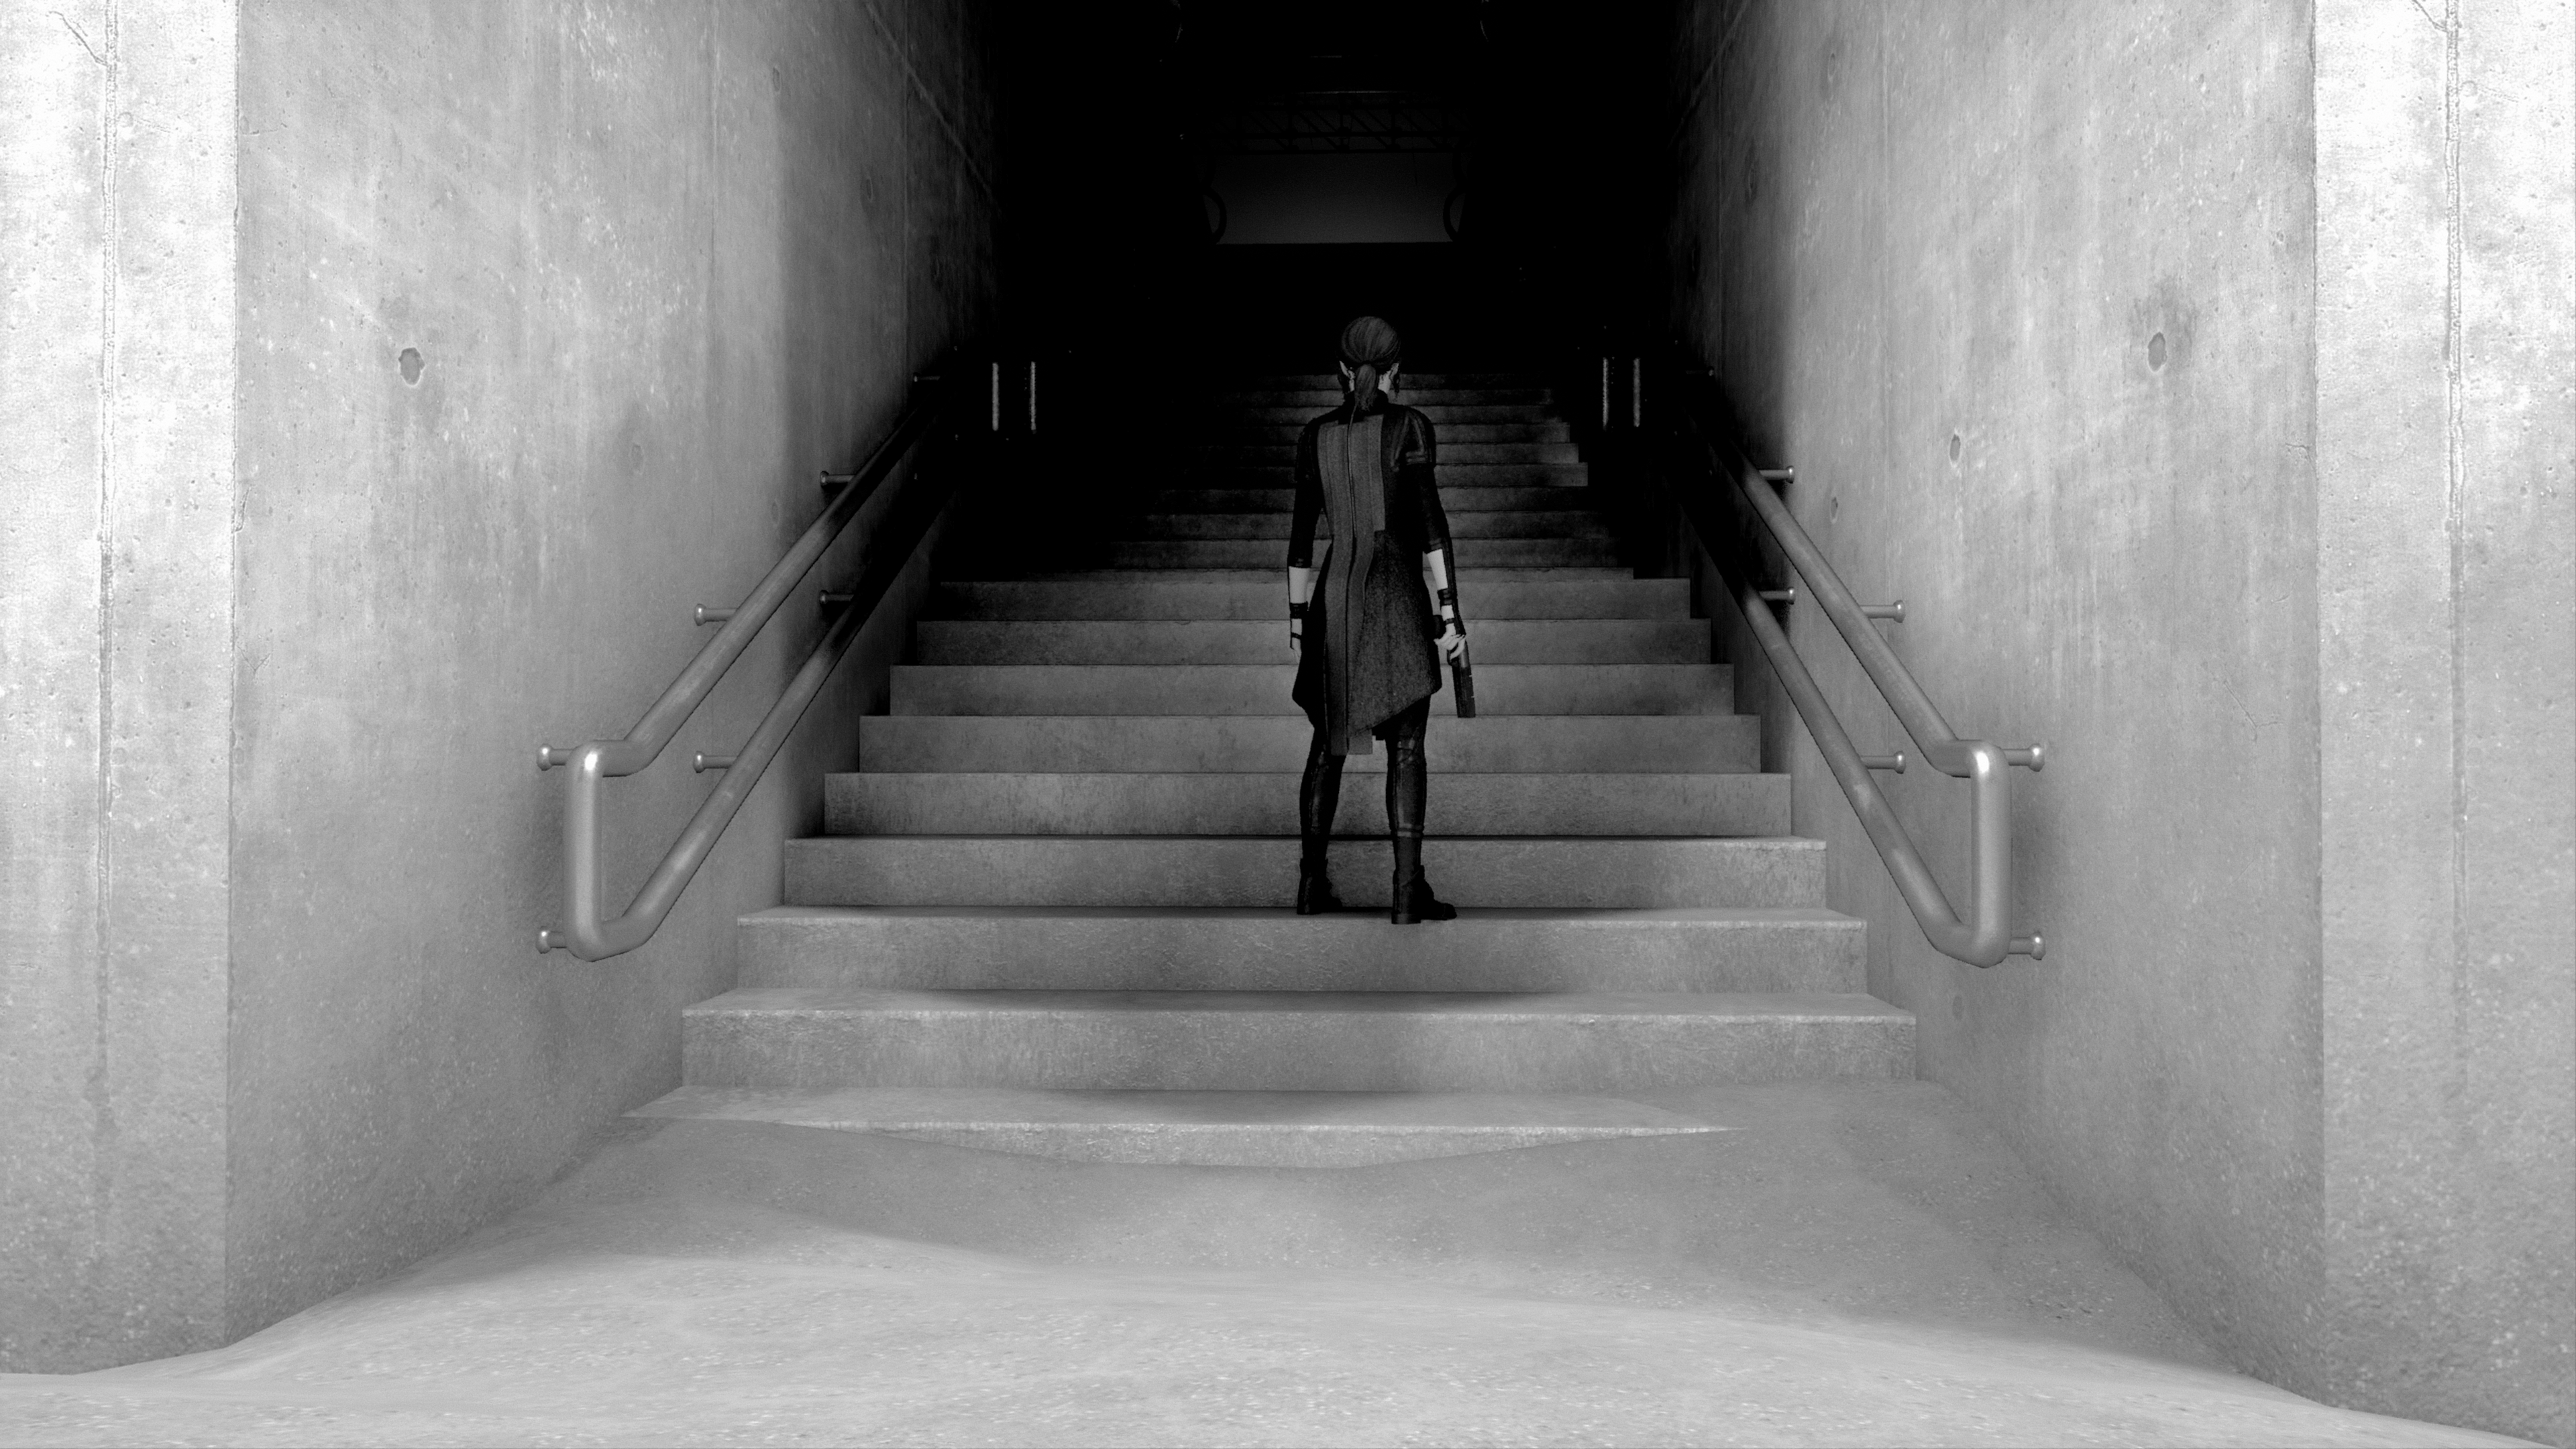 The protagonist, Jesse, stands at the bottom of a set of stairs looking up into the dark void they ascend to.